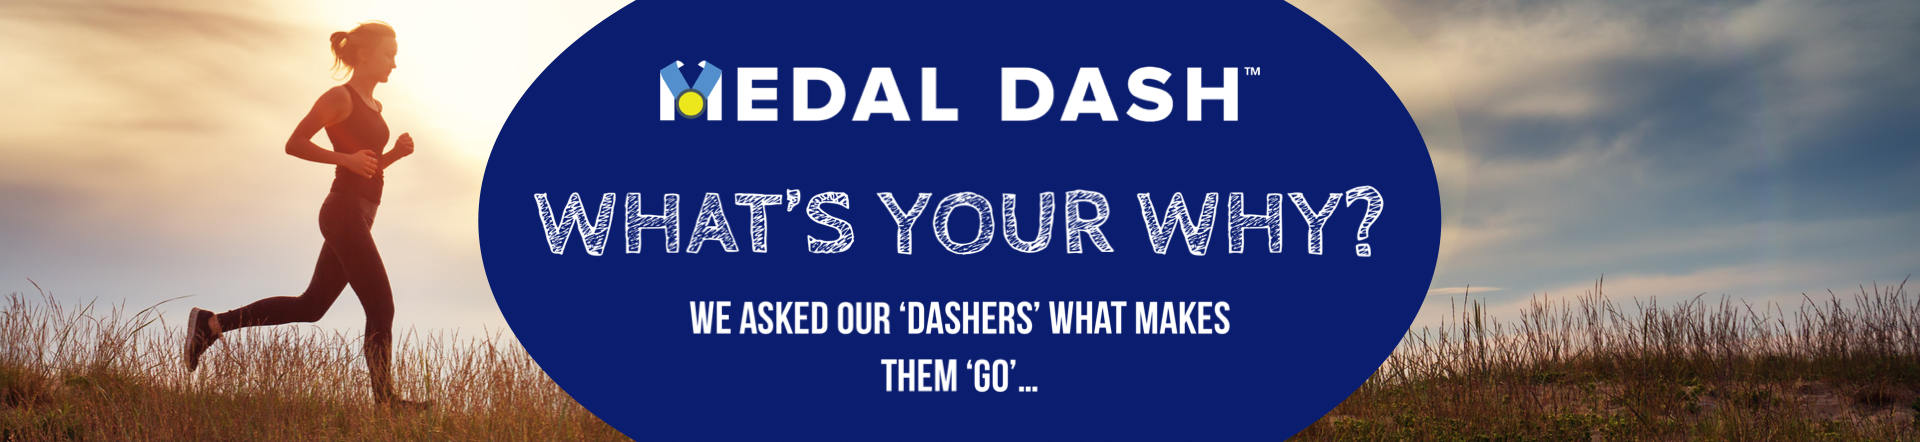 medal dash customer experiences - what's your why? we asked our dashers what makes them go